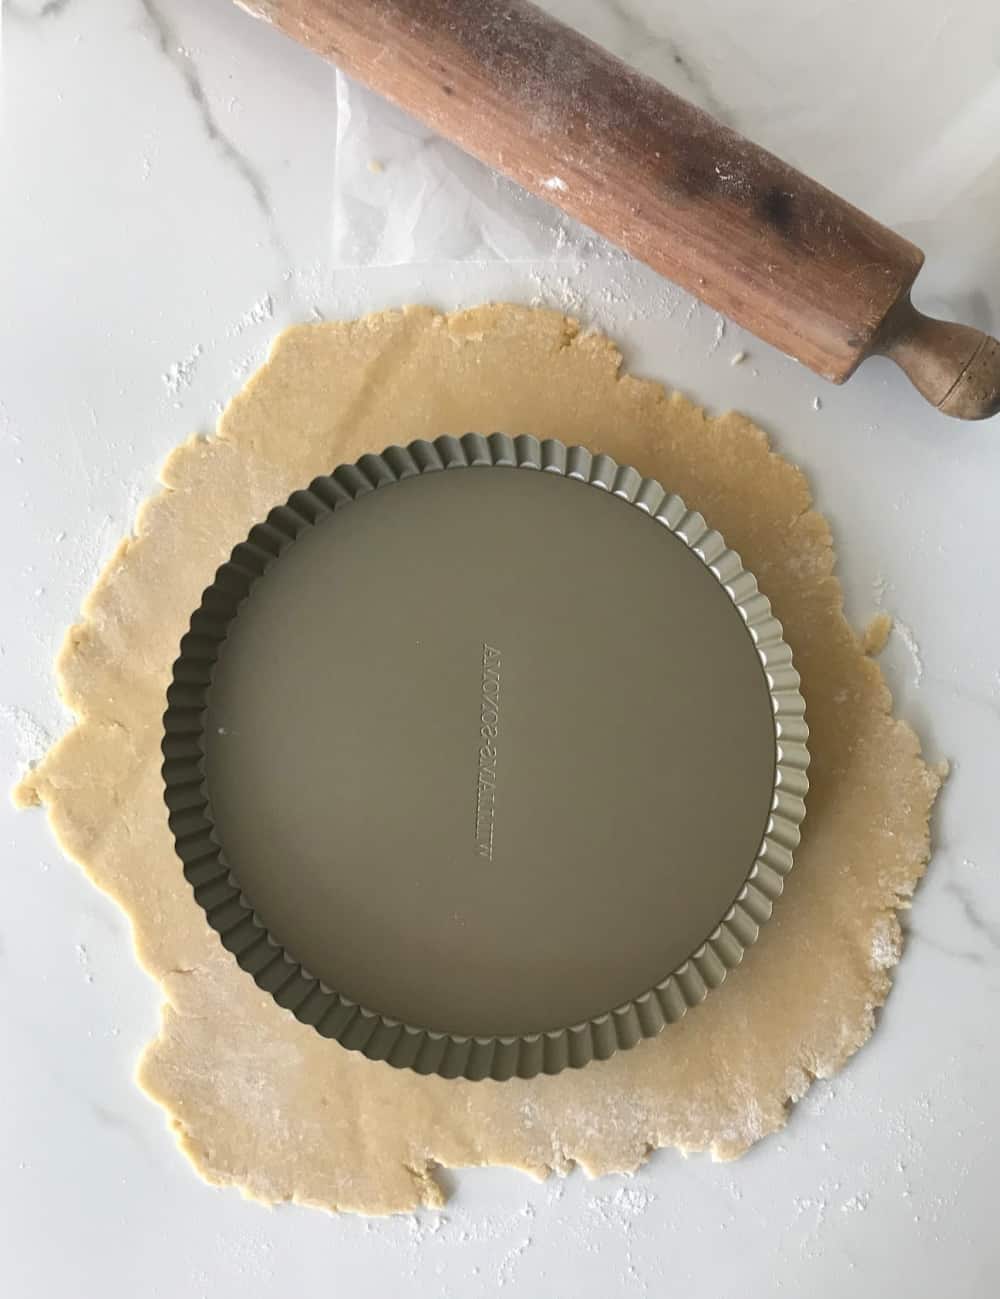 Round of sweet dough with pie pan on top, white surface, rolling pin.